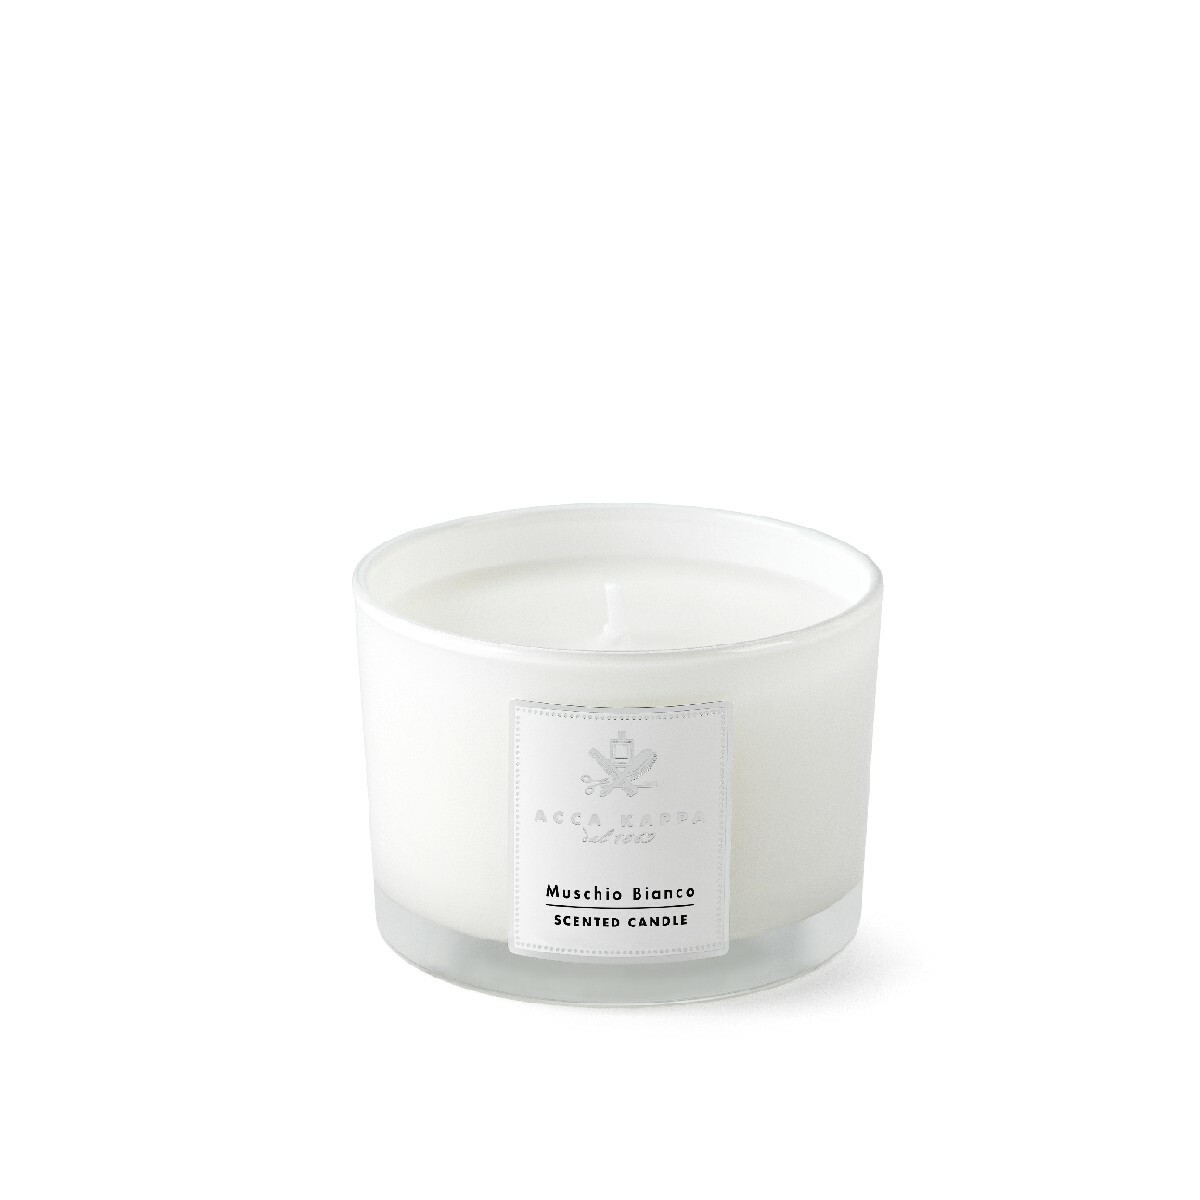 Acca Kappa White Moss Scented Candle 180g